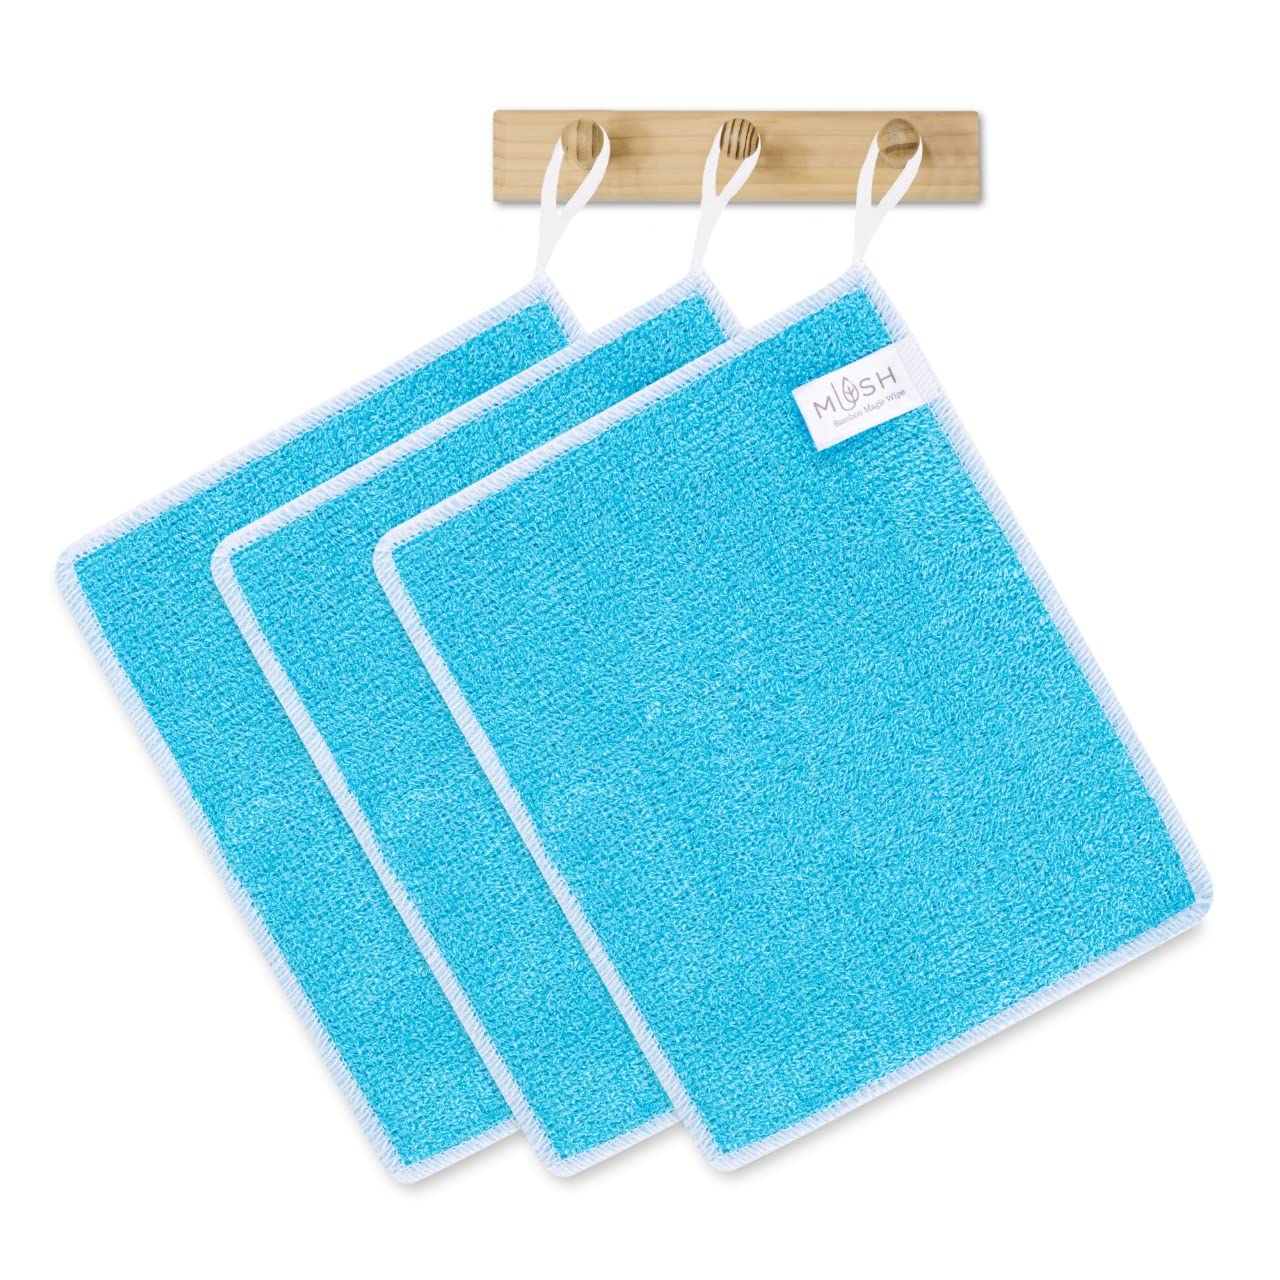 Mush Bamboo Super Absorbent, Anti Odor, Lint and Streak Free Reusable Cleaning Towel- Multipurpose Wash Cloth for Kitchen, Car, Windows, Glass, Utensils, Furniture.